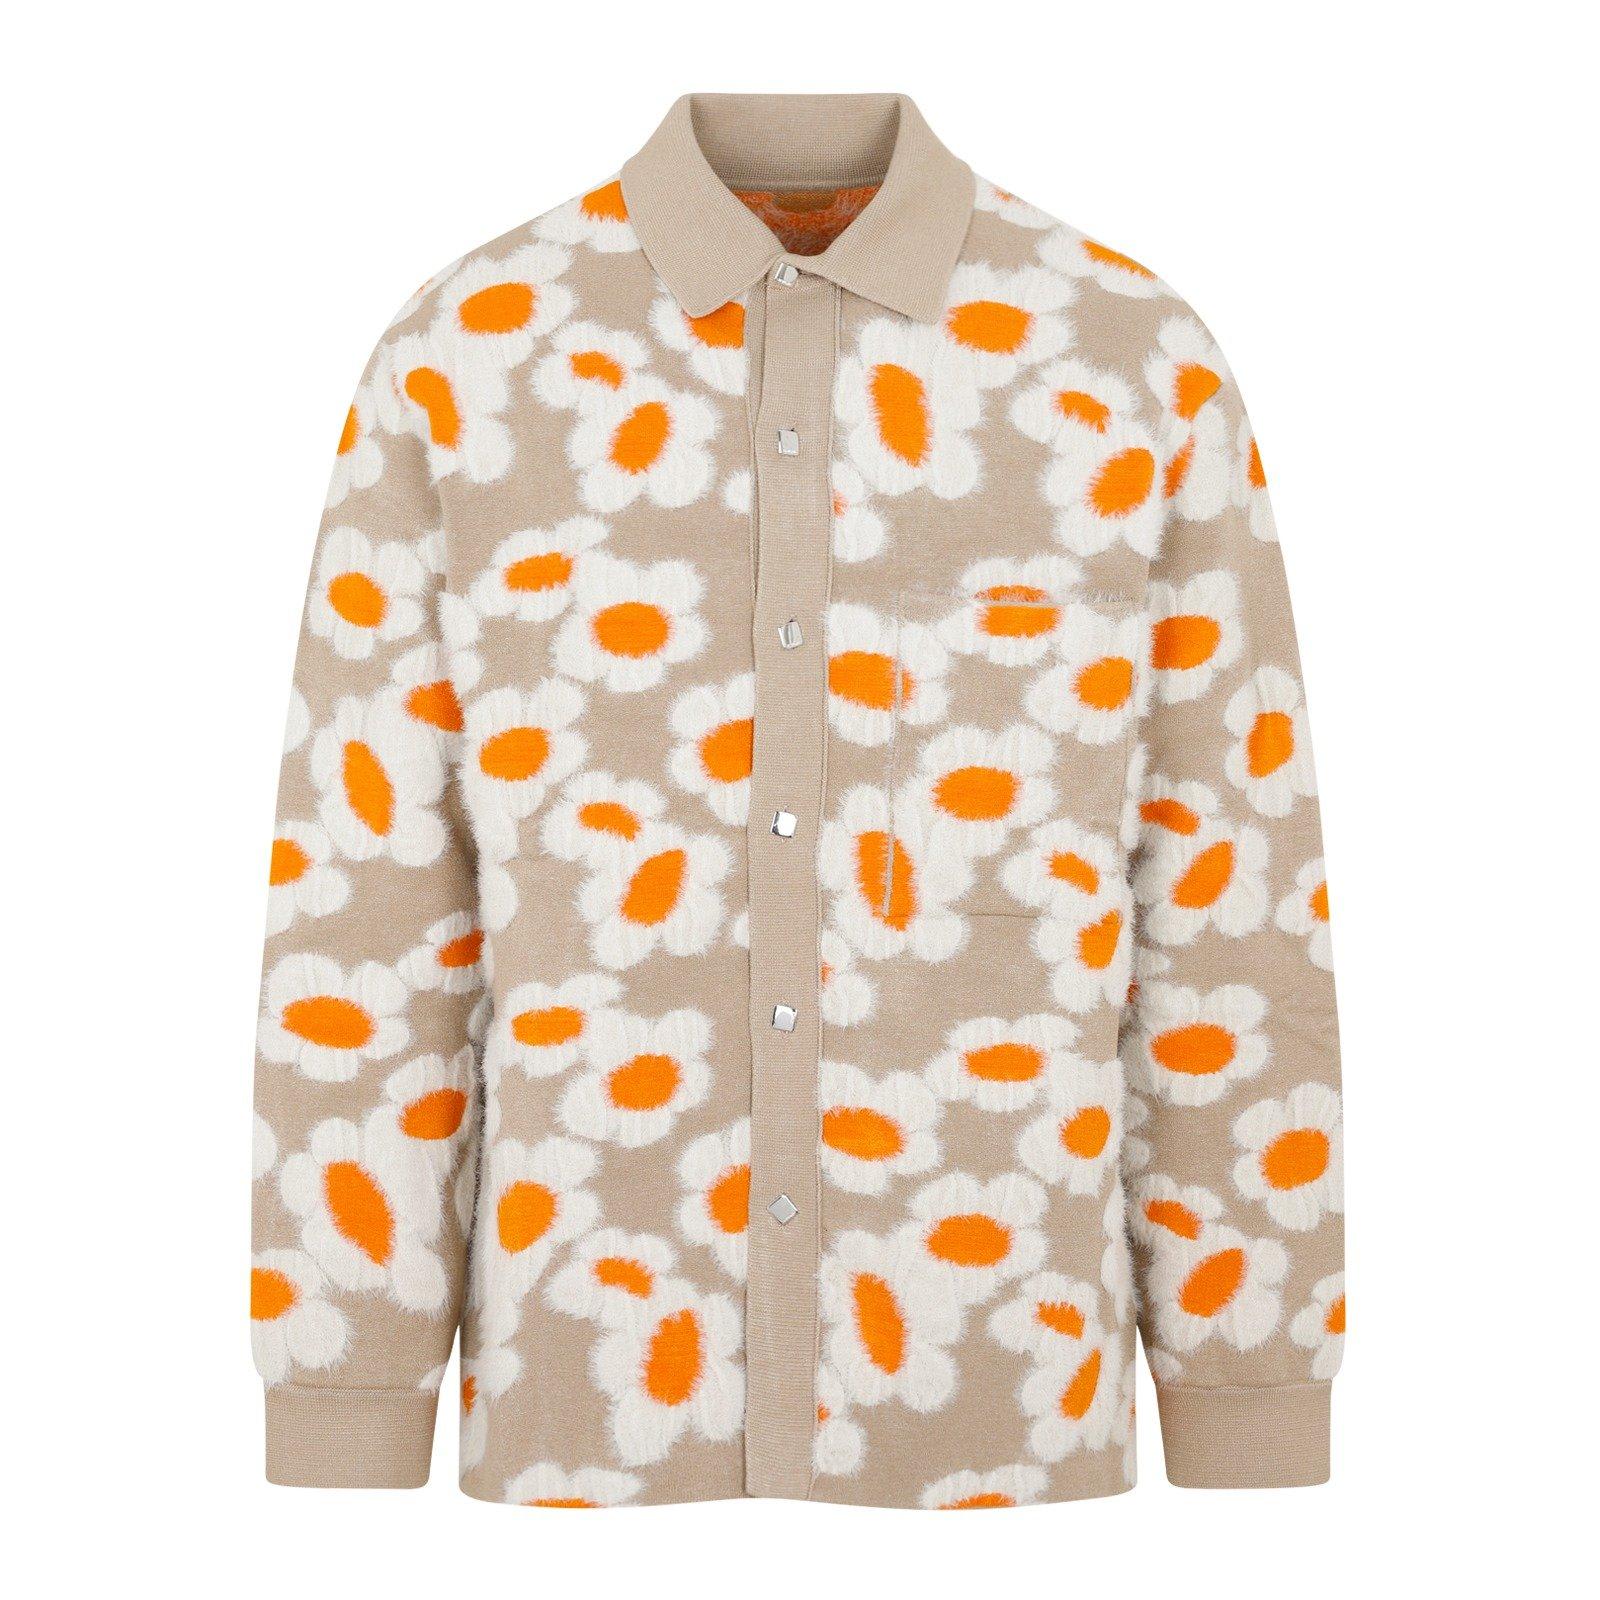 Jacquemus Floral Patterned Long-sleeved Shirt